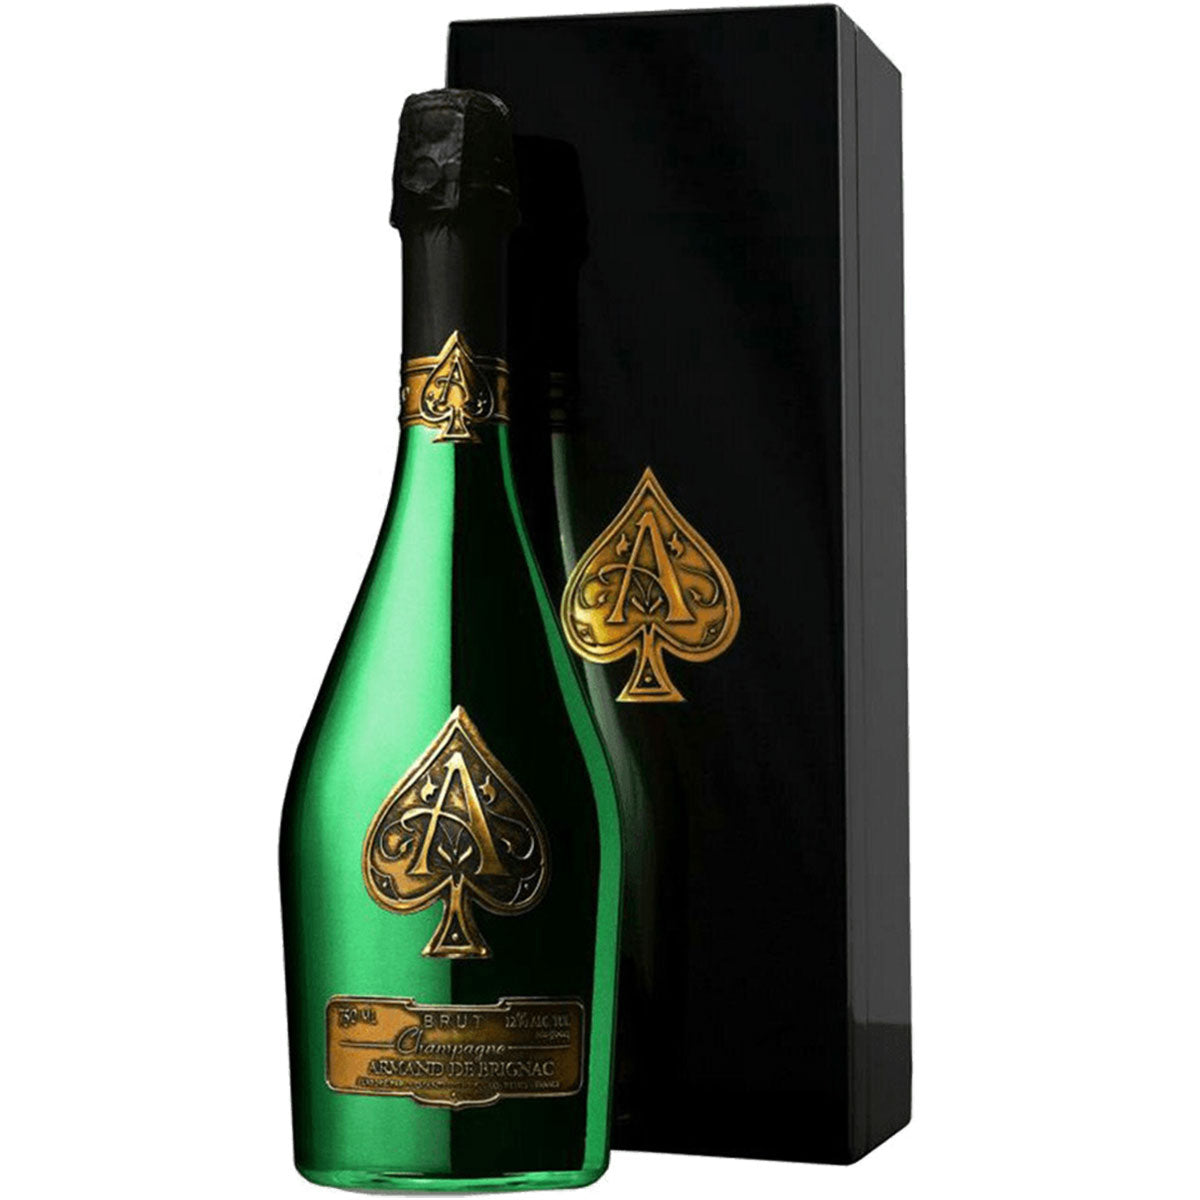 10 Things Every Wine Lover Should Know About Ace of Spades